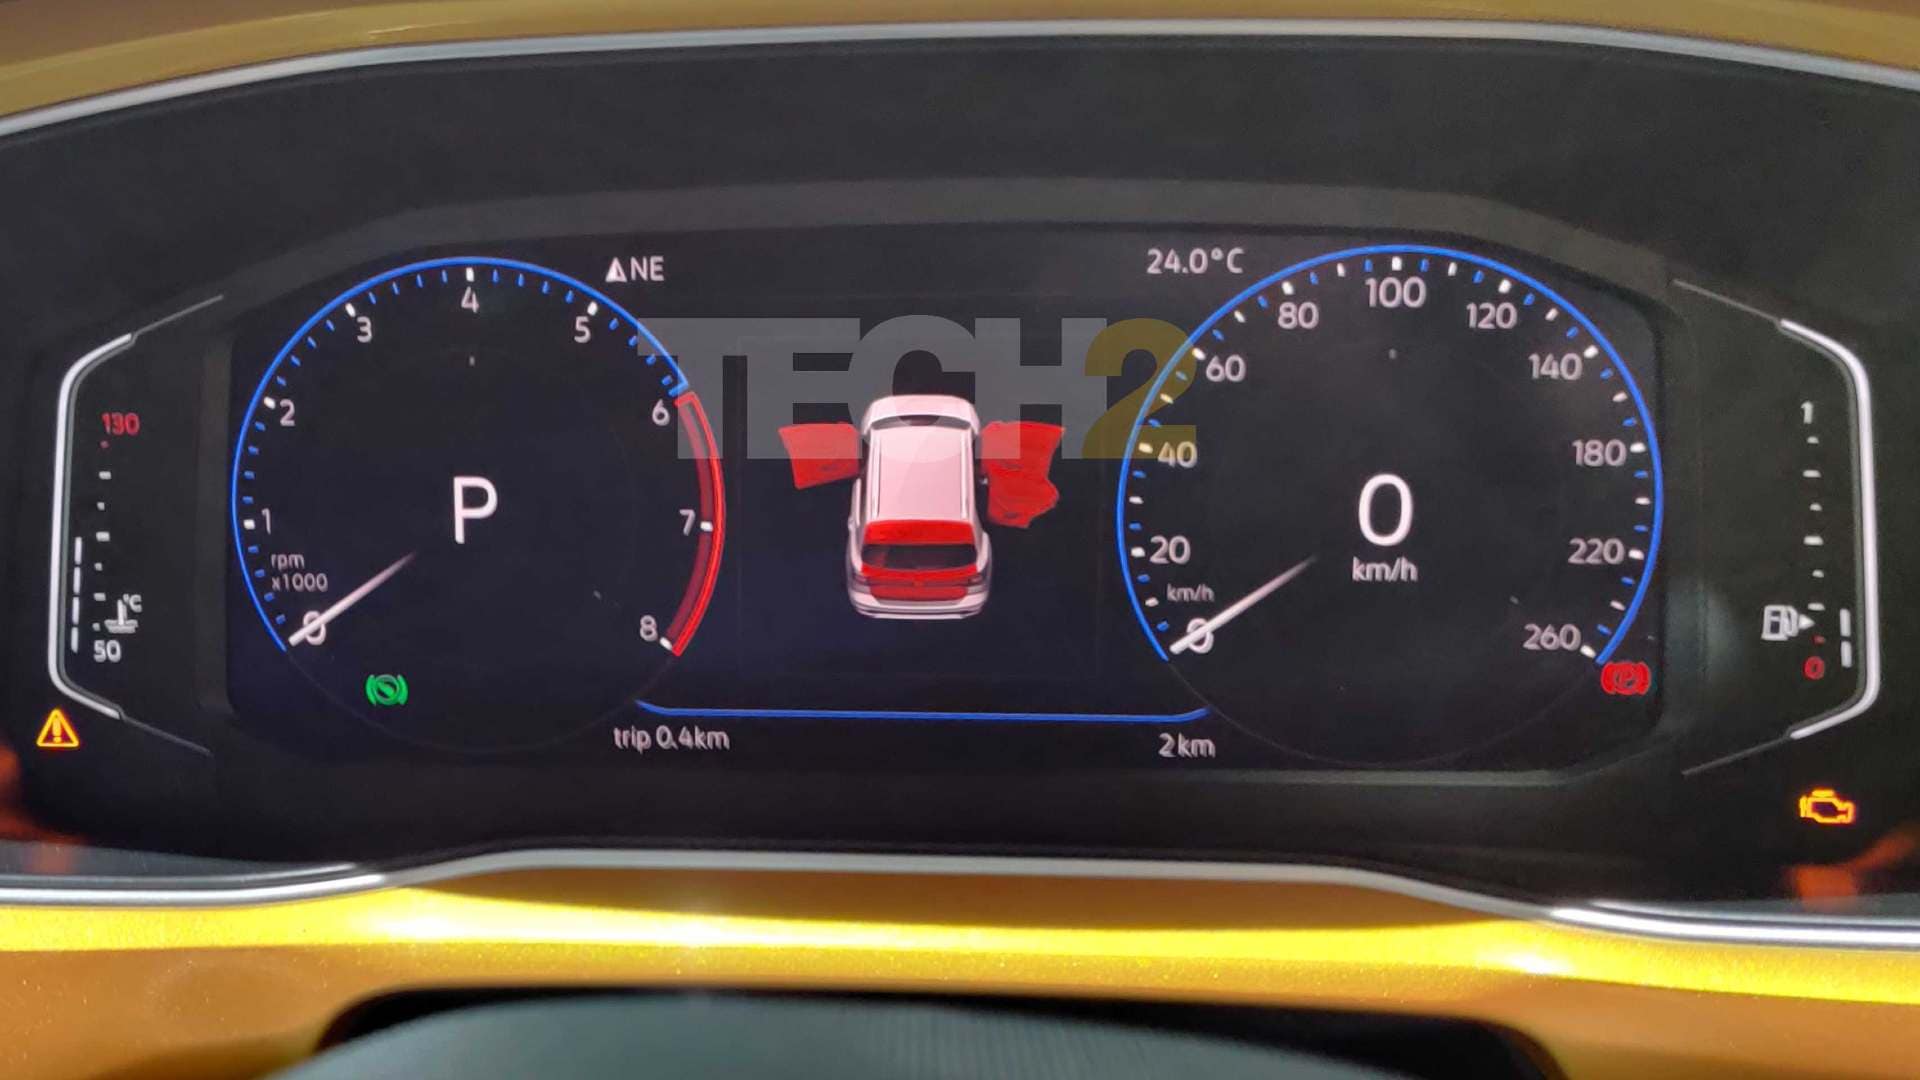 One key differentiator for the Volkswagen Taigun over the Skoda Kushaq will be its full digital instruments display. Image: Tech2